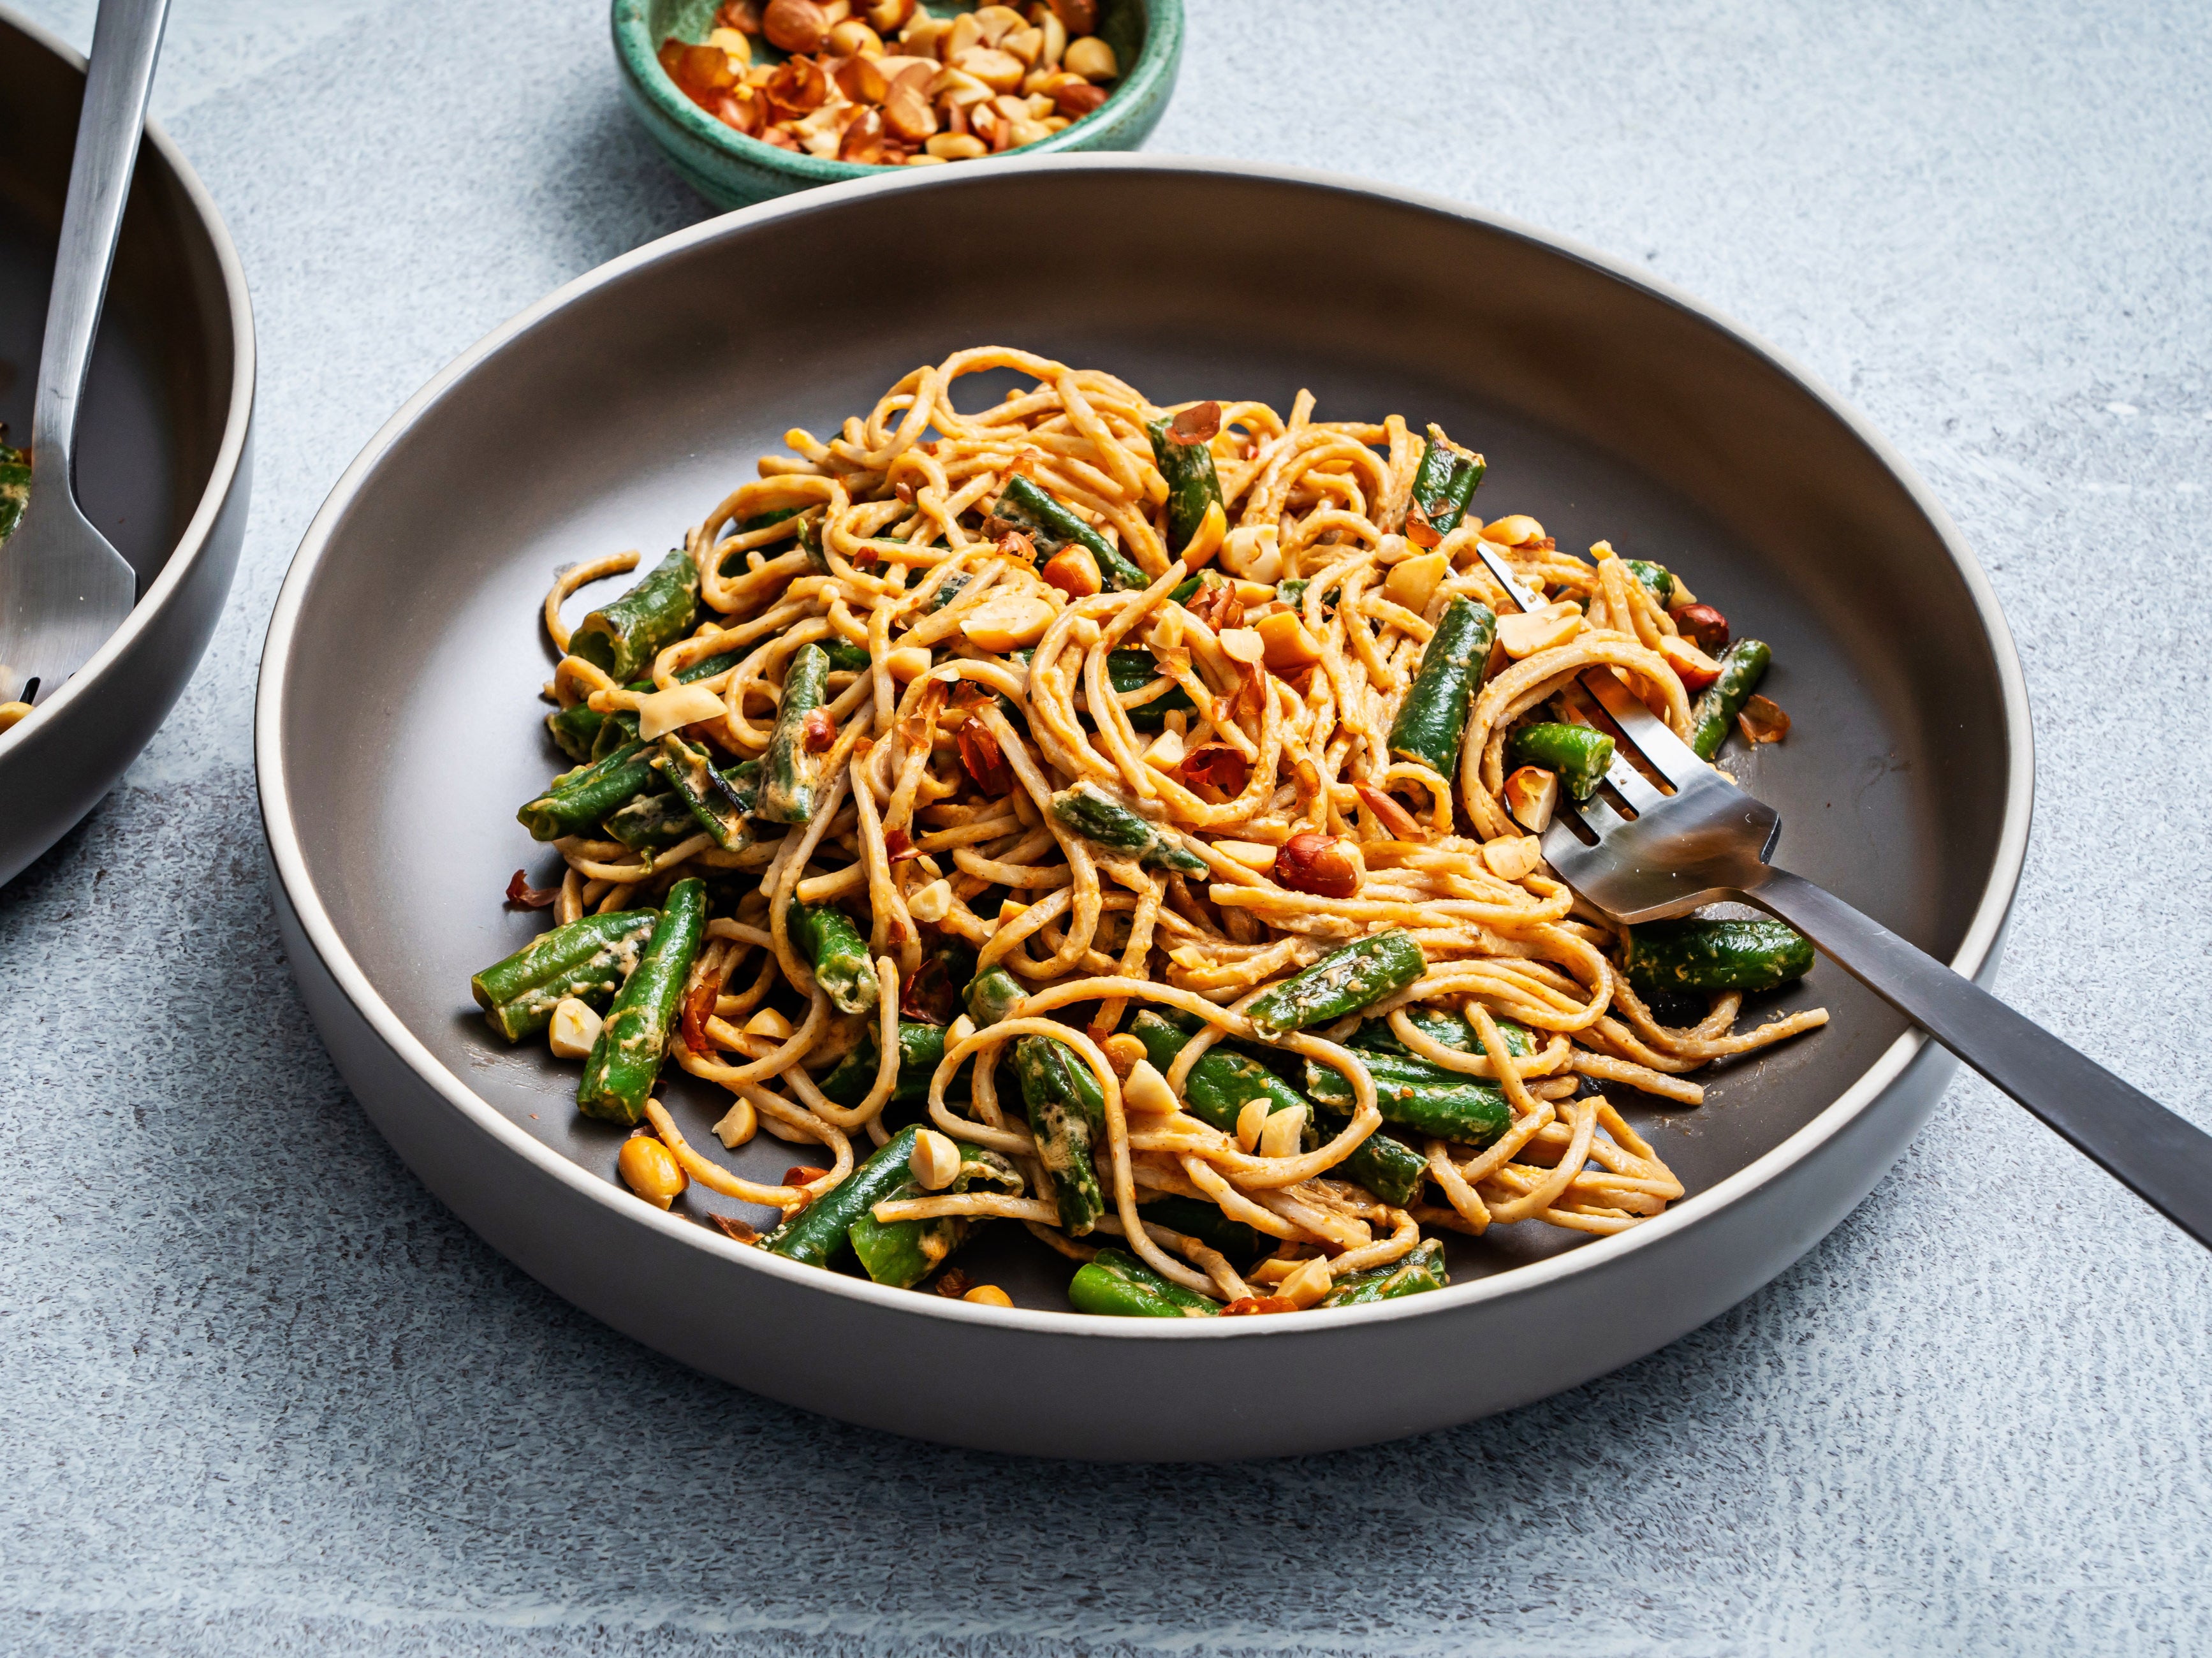 Spicy peanut noodle recipe Quick, easy and ready to be improvised The Independent